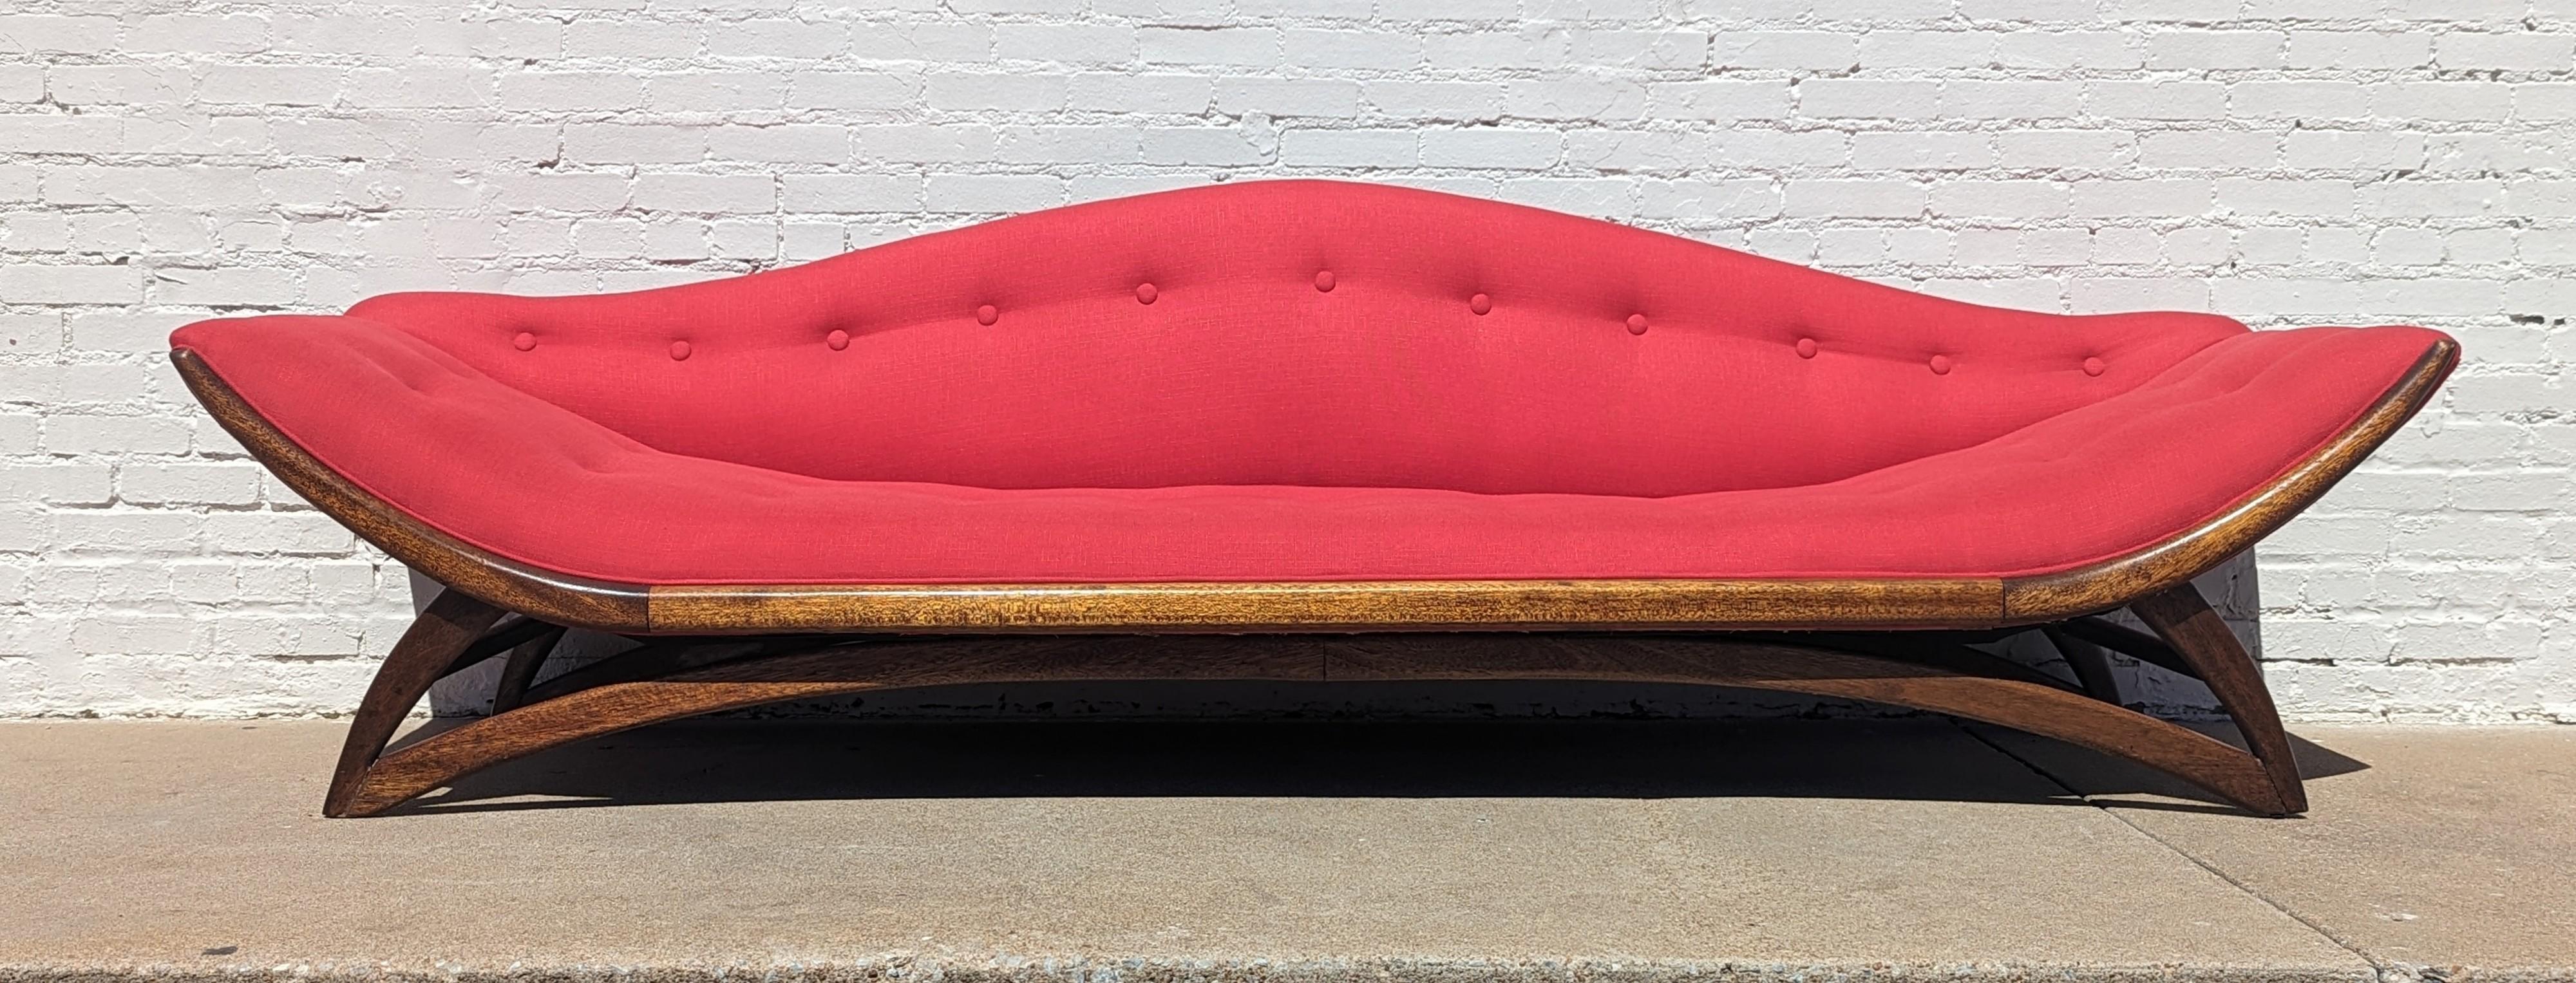 Mid Century Modern Red Gondola Sofa by Carter Manufacturing  In Good Condition For Sale In Tulsa, OK